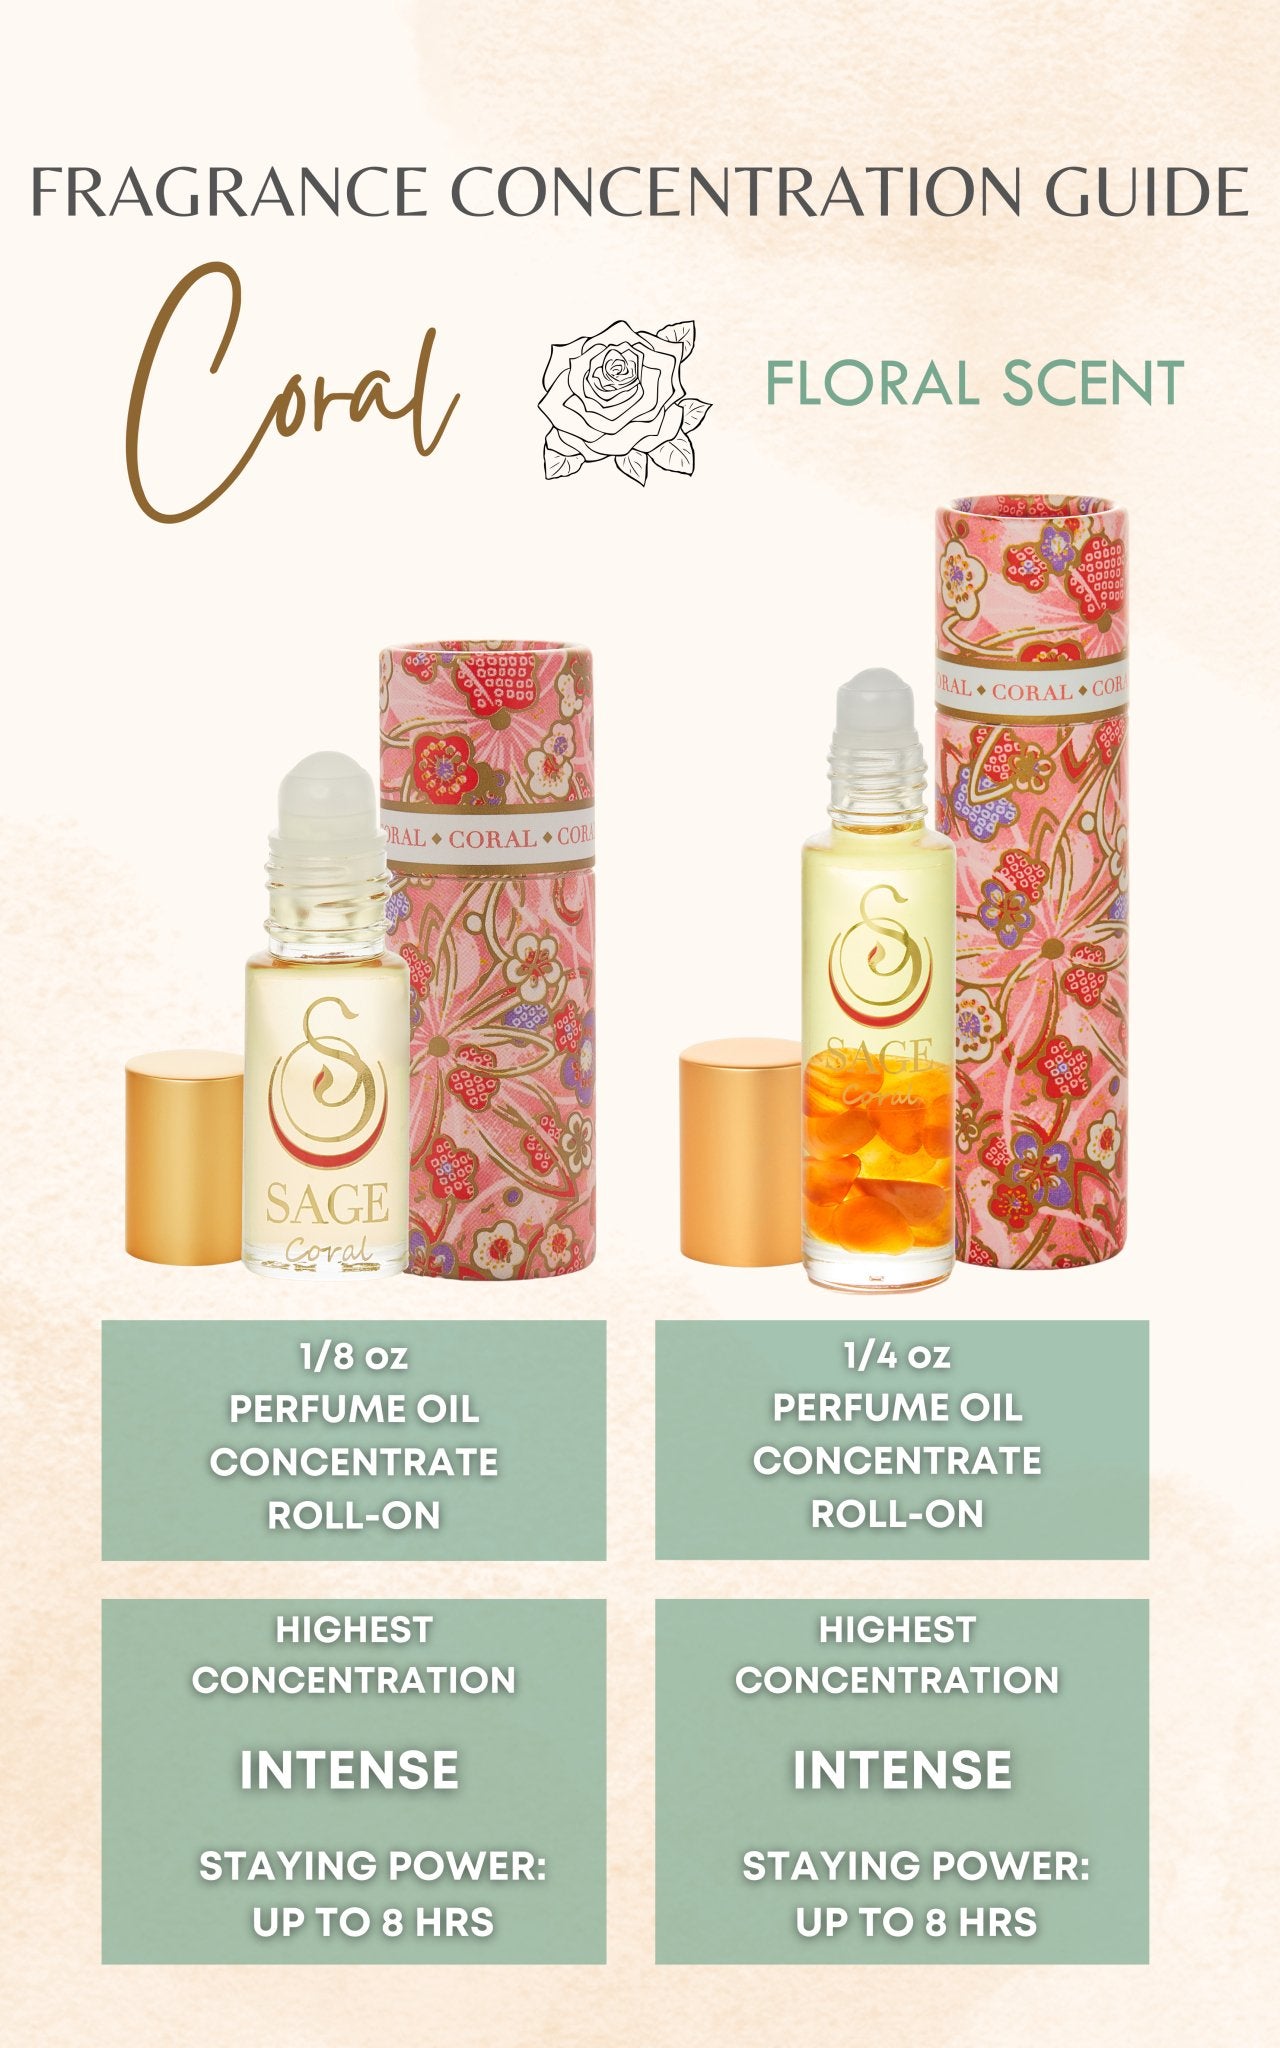 Coral 1/8 oz Perfume Oil Concentrate Roll-On by Sage - The Sage Lifestyle